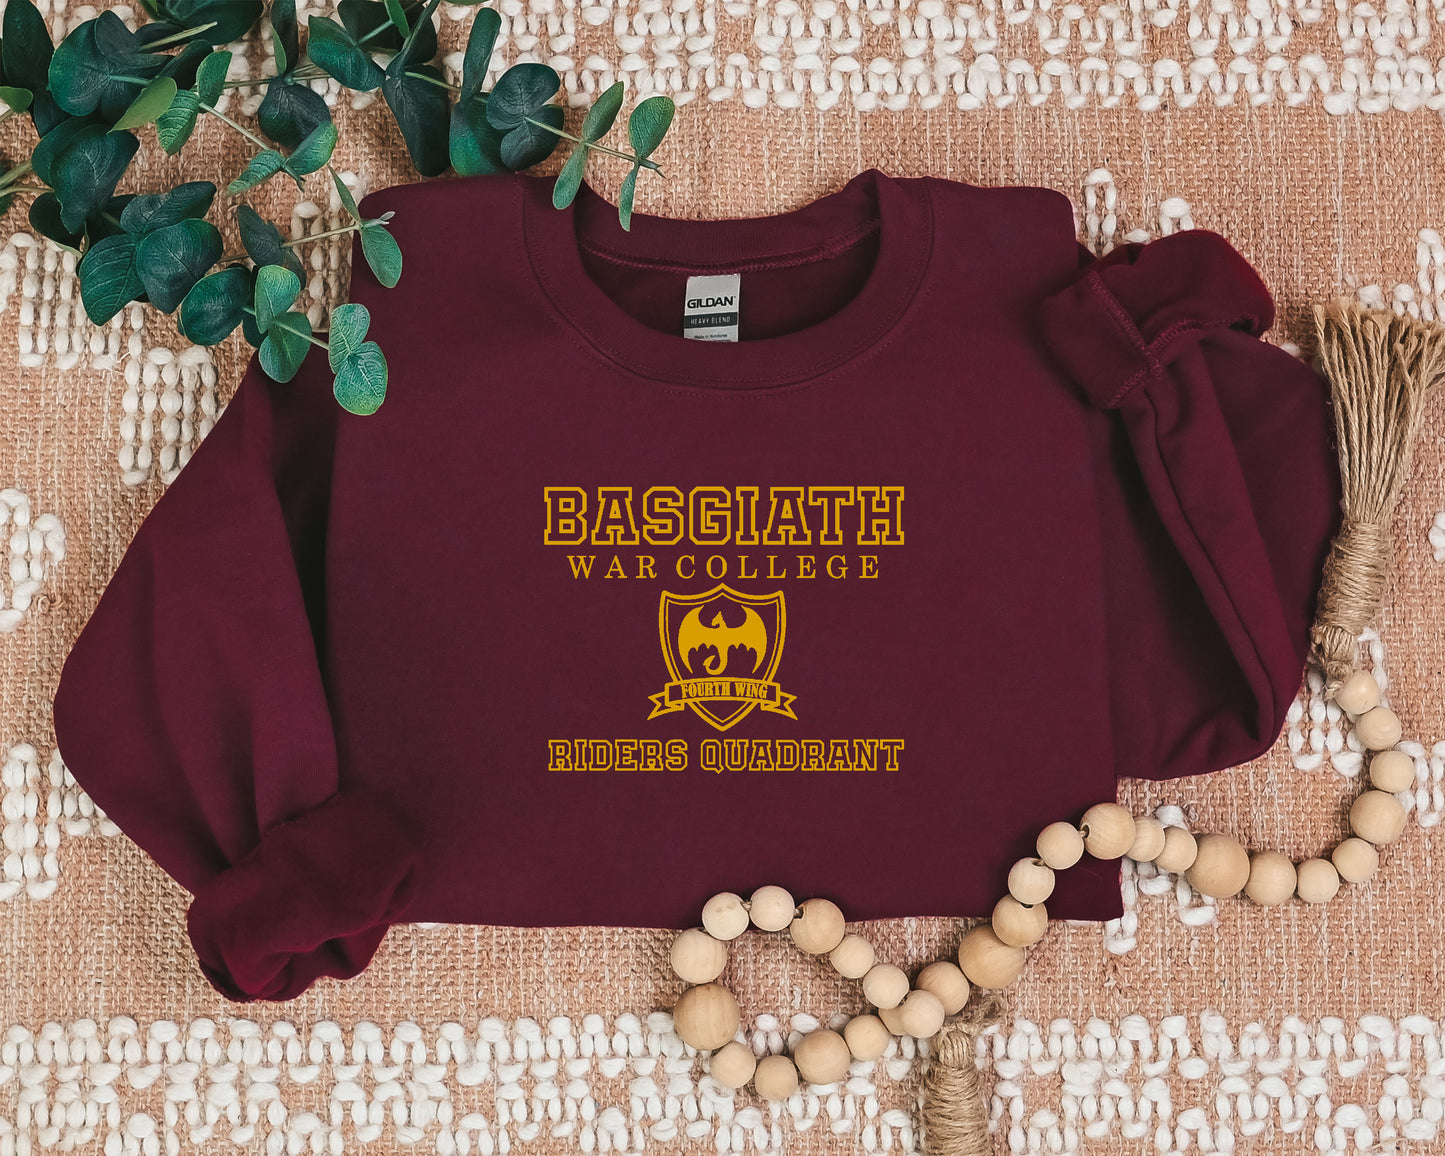 Emroidered Basgiath War College Sweatshirt with Gold Lettering